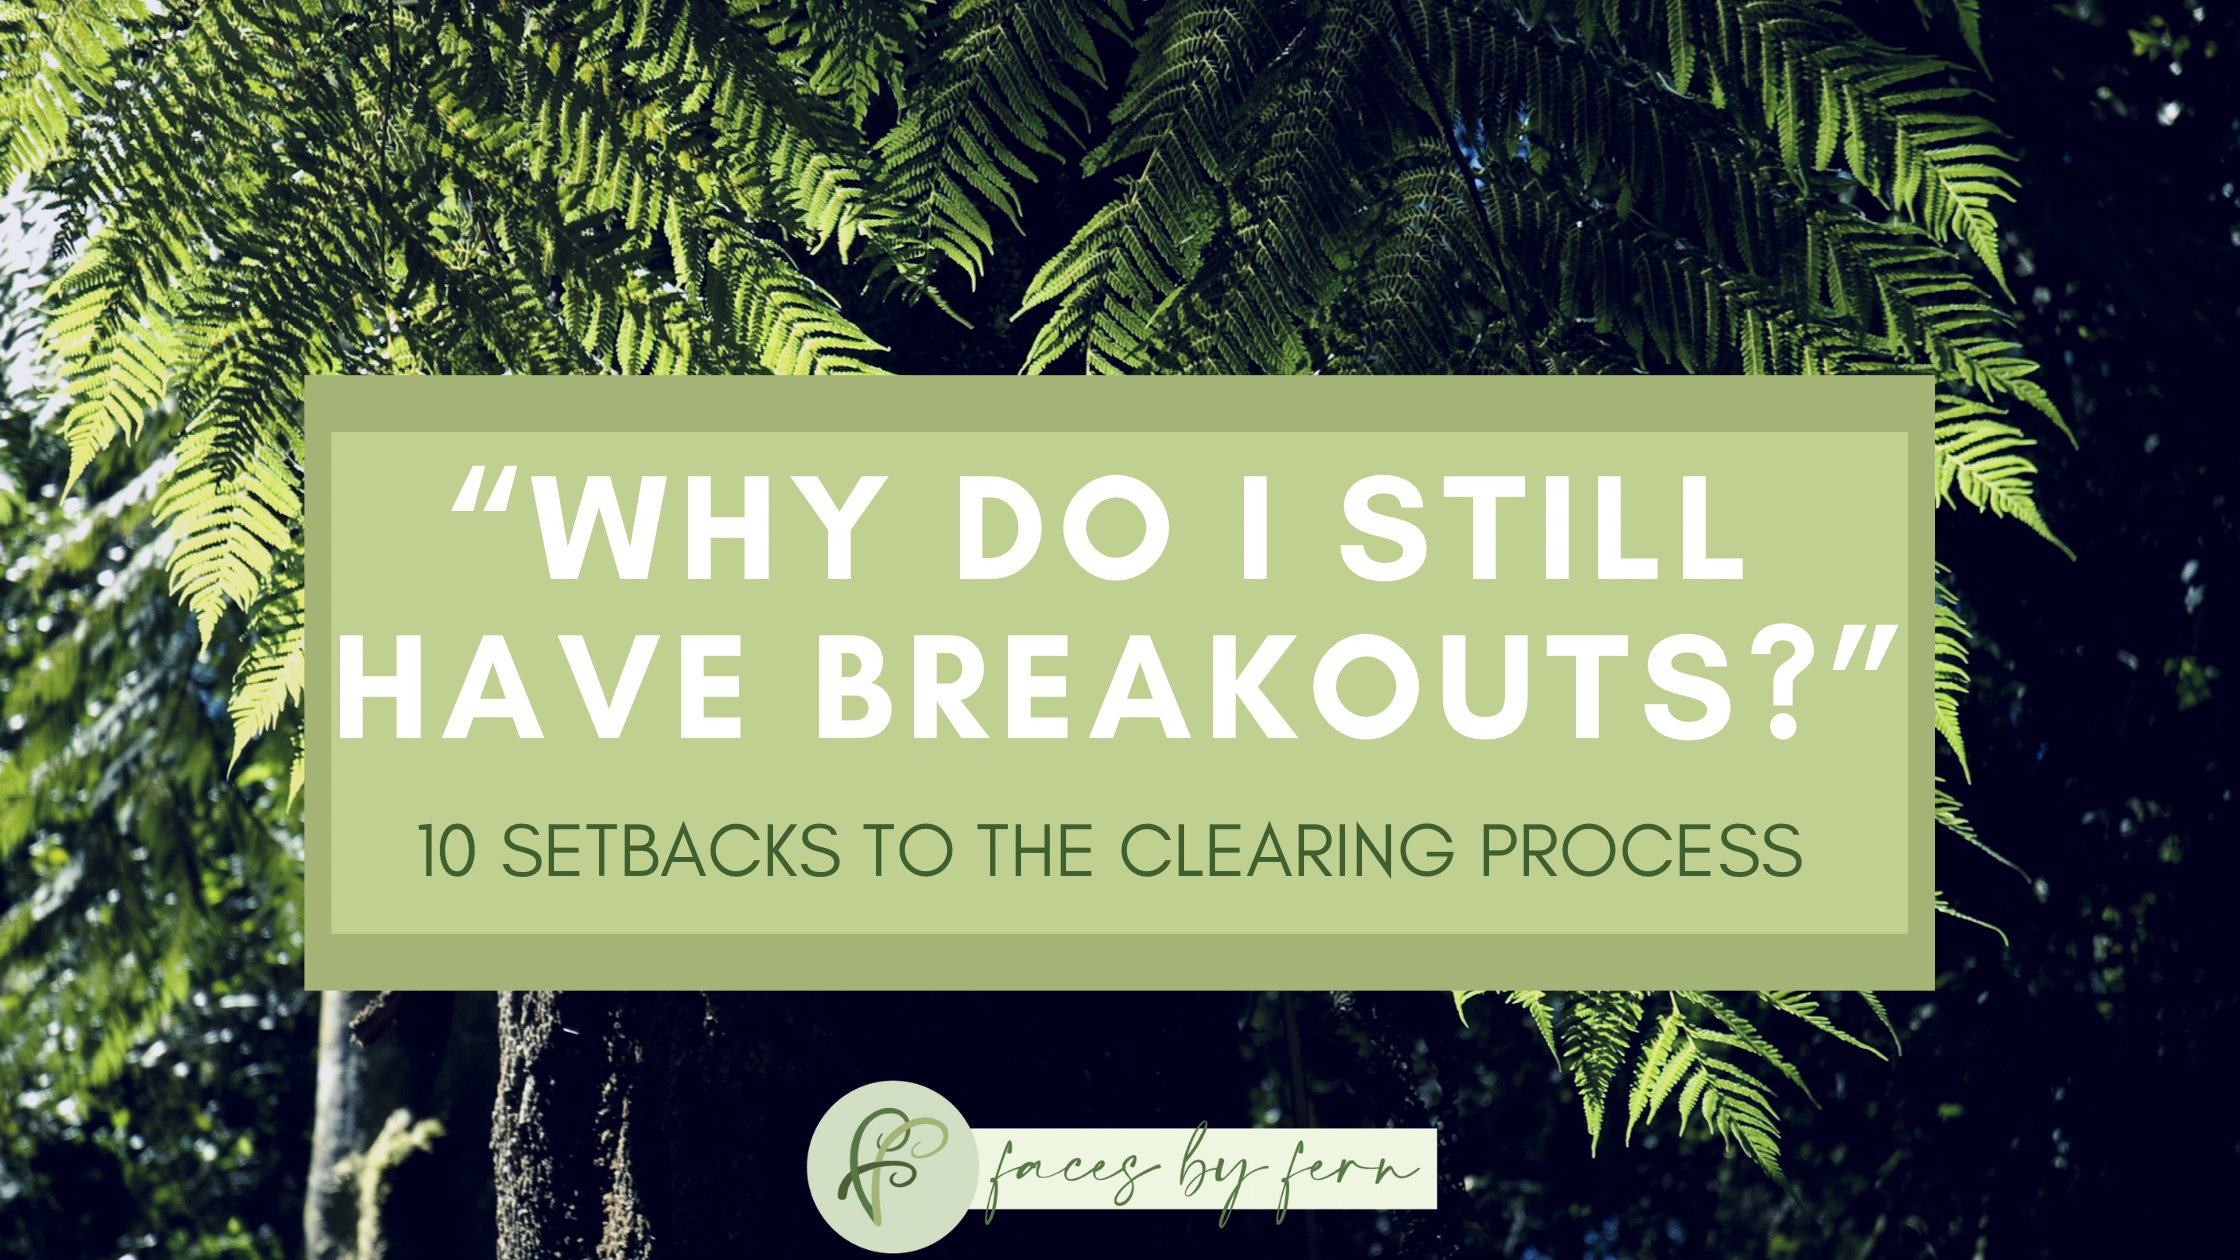 10 Setbacks to the Clearing Process | “Why do I still have breakouts?”